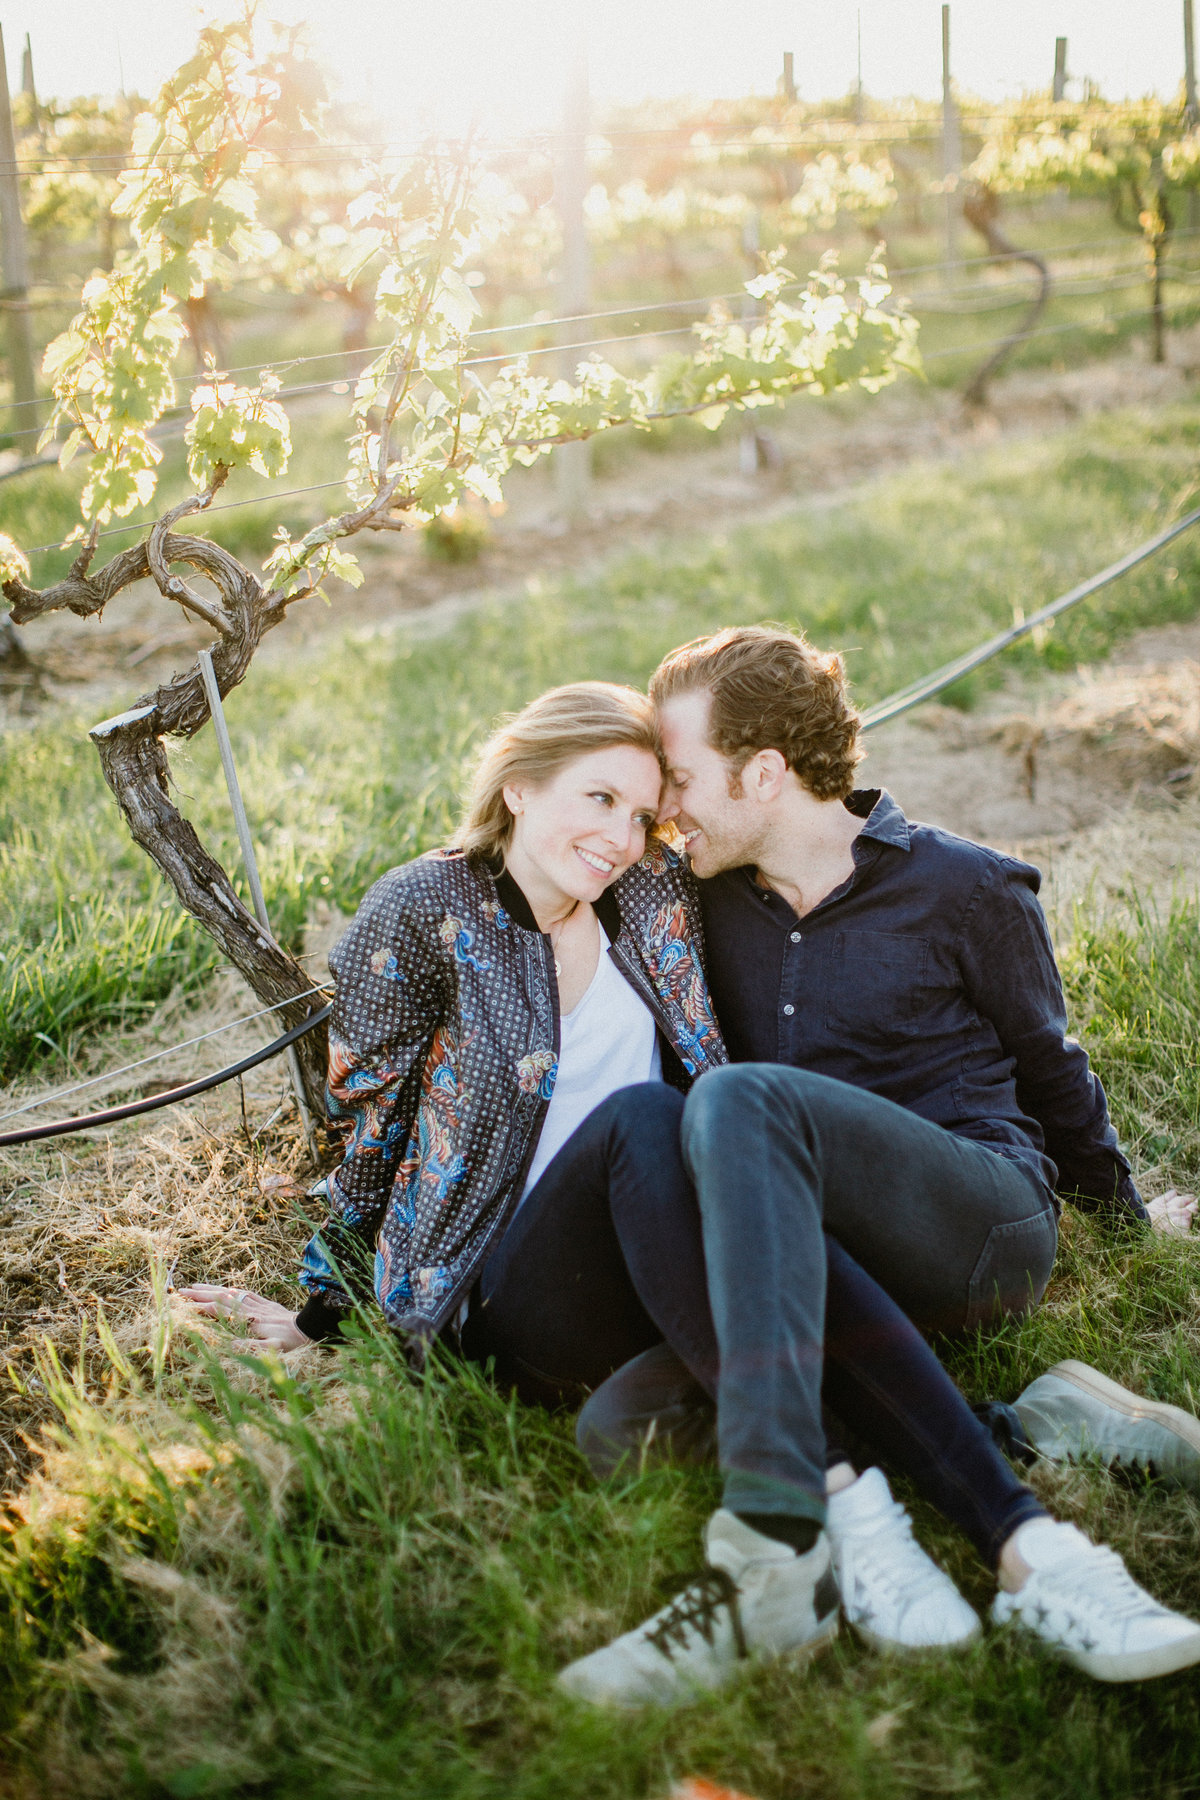 Sunset engagement session at a winery location in New York,  photographed by Sweetwater.